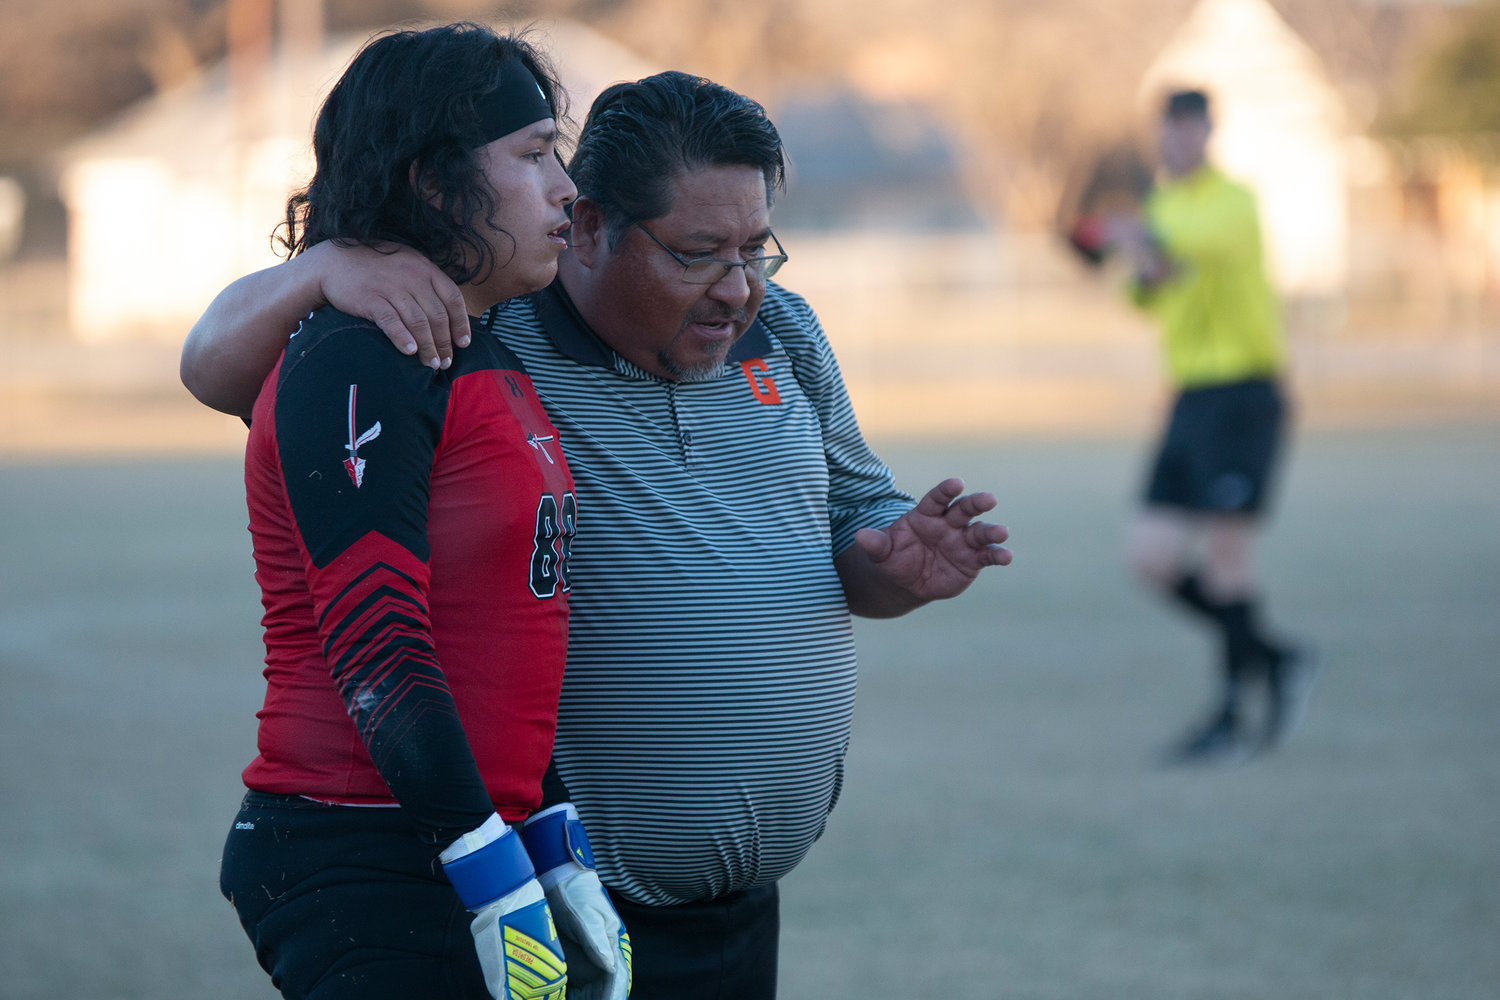 Head boys soccer coach Greg Ramirez ends his career with the Gonzales Apaches with a 101-20-8 overall record. As the program’s inaugural coach, Ramirez led the team to multiple district titles as well as regional tournament appearances.